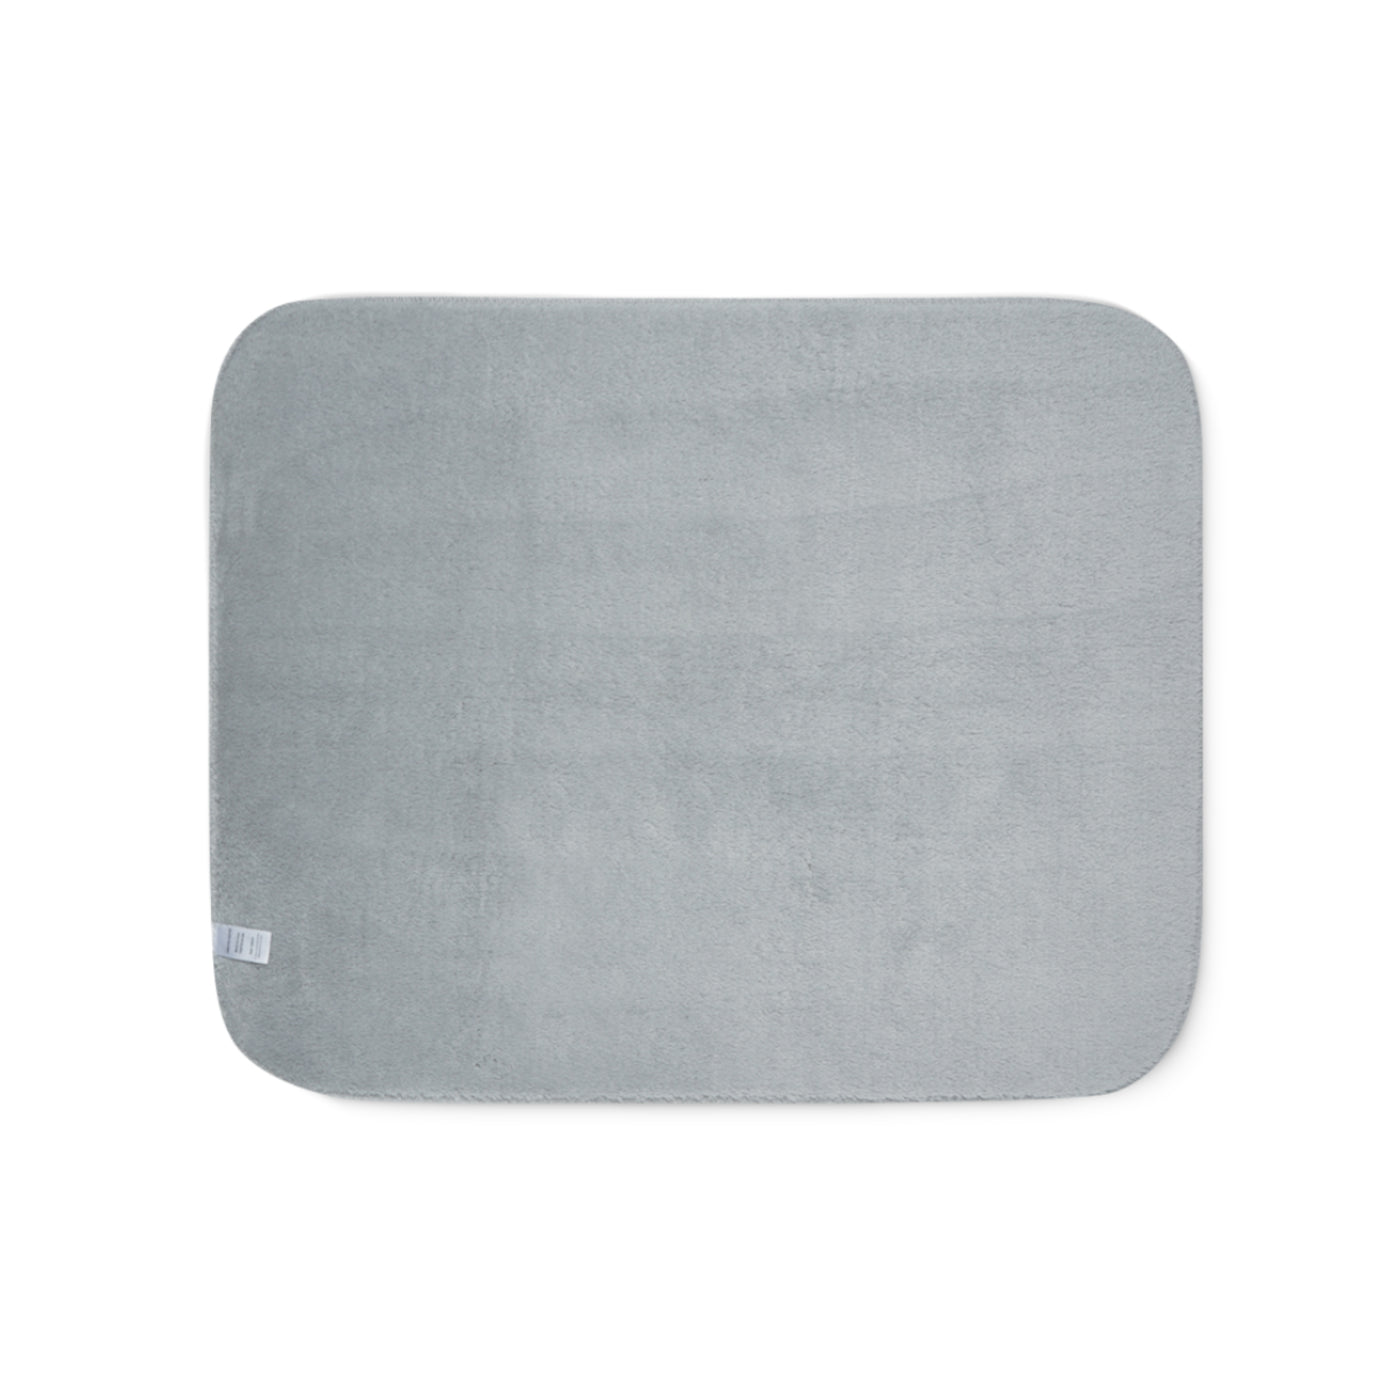 RPK Sherpa Blanket - Just The Piece - White Background